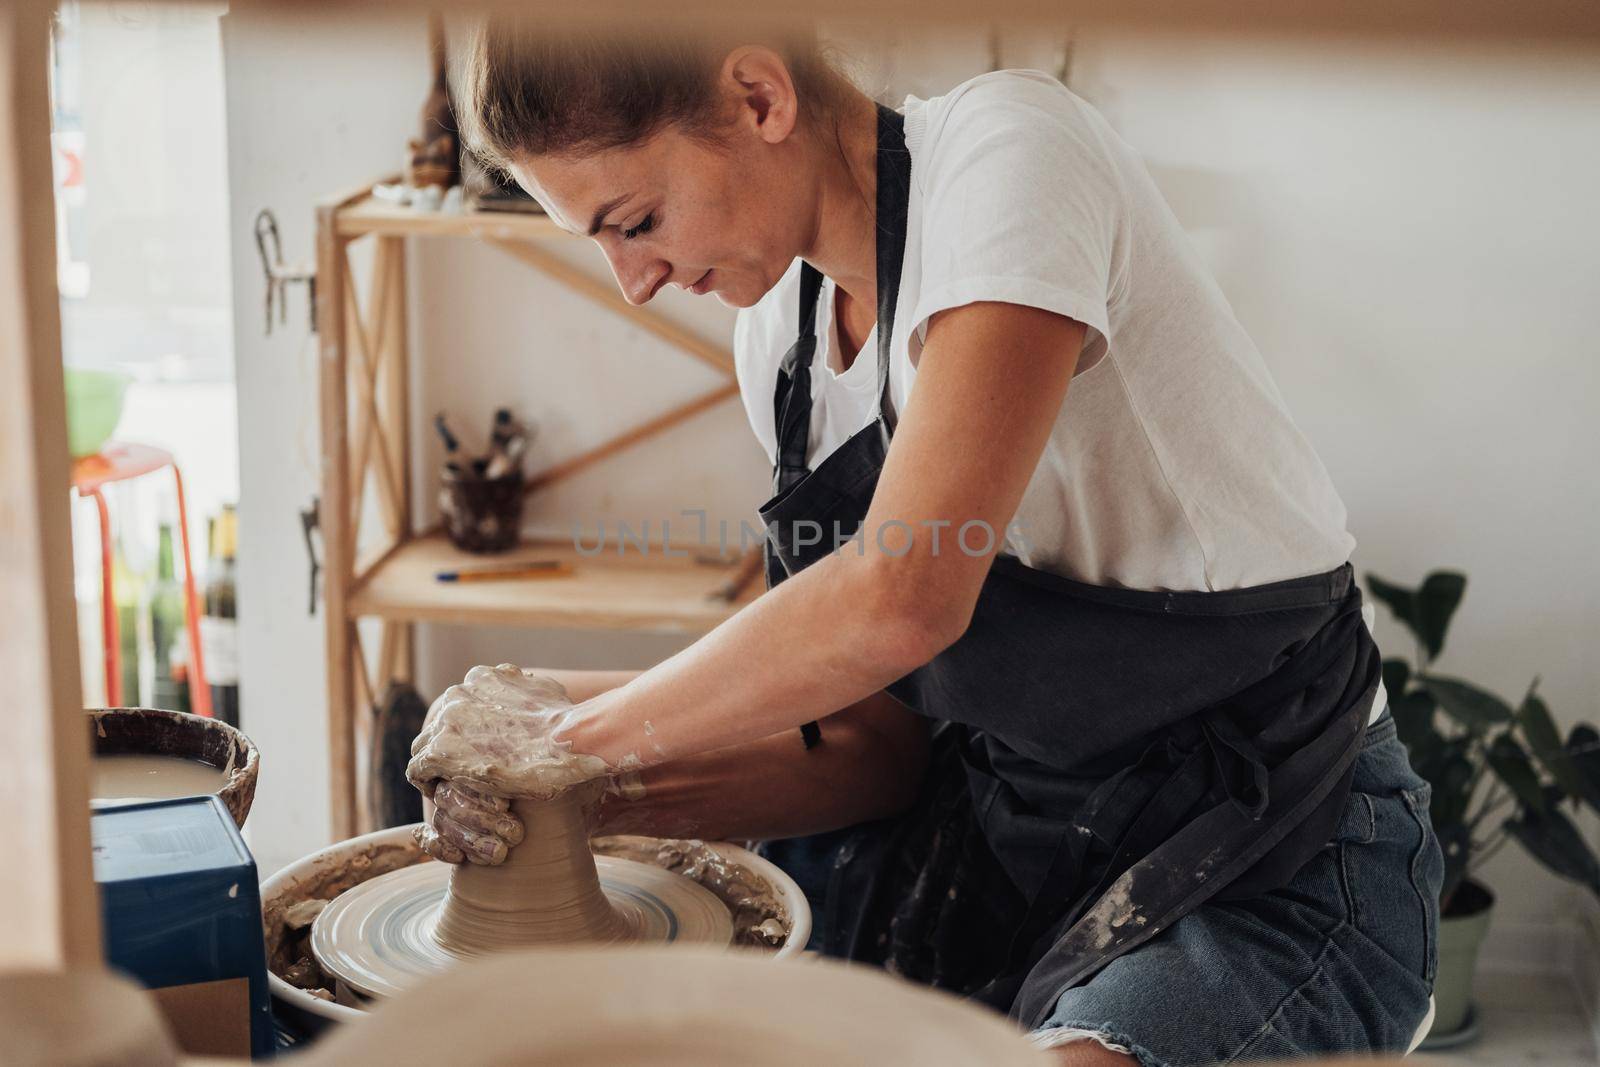 Potter Master at Work, Young Caucasian Woman Creating Clay Pot on a Pottery Wheel in Her Studio by Romvy